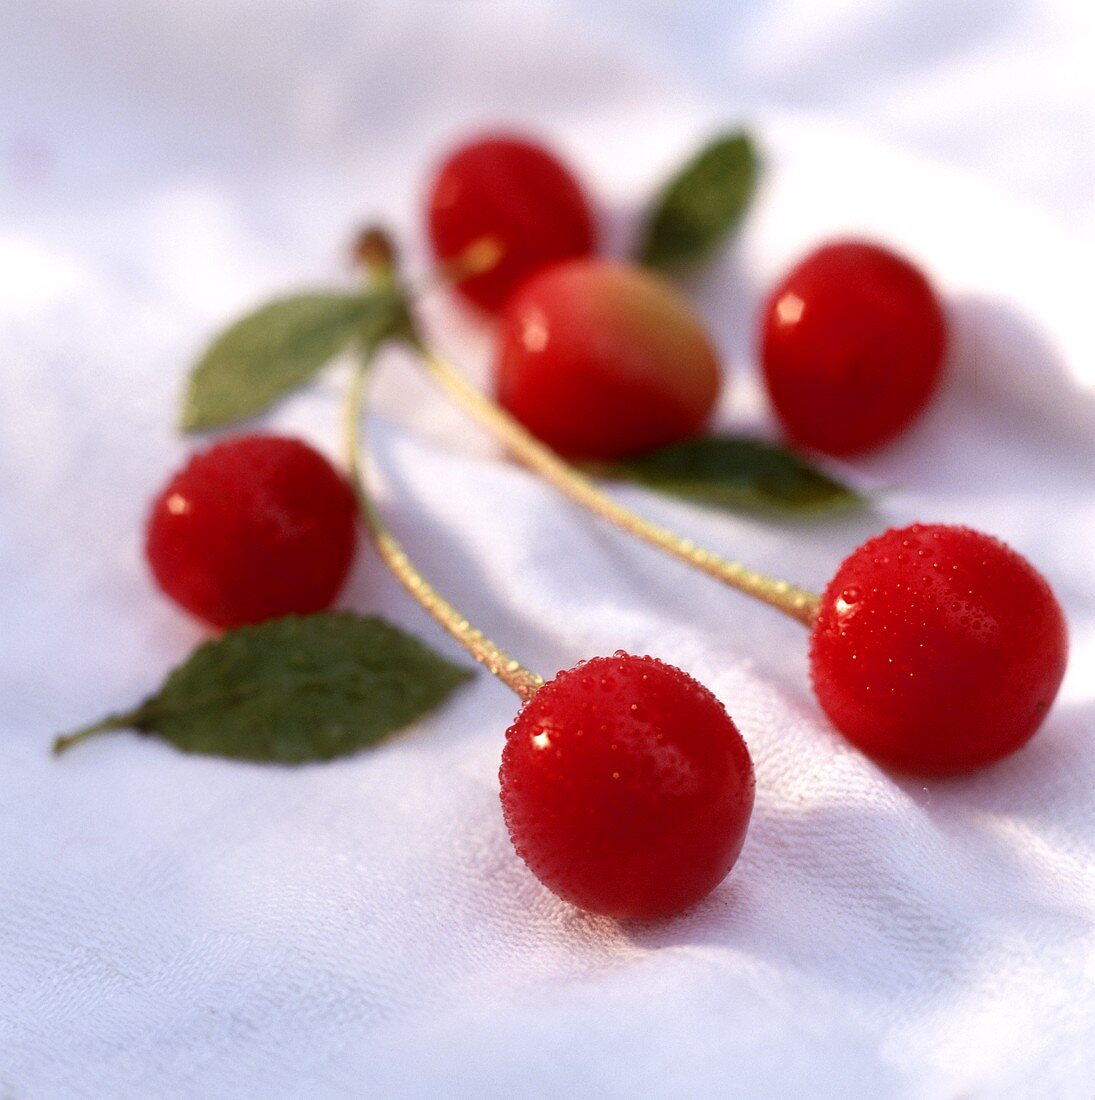 A few cherries with drops of water